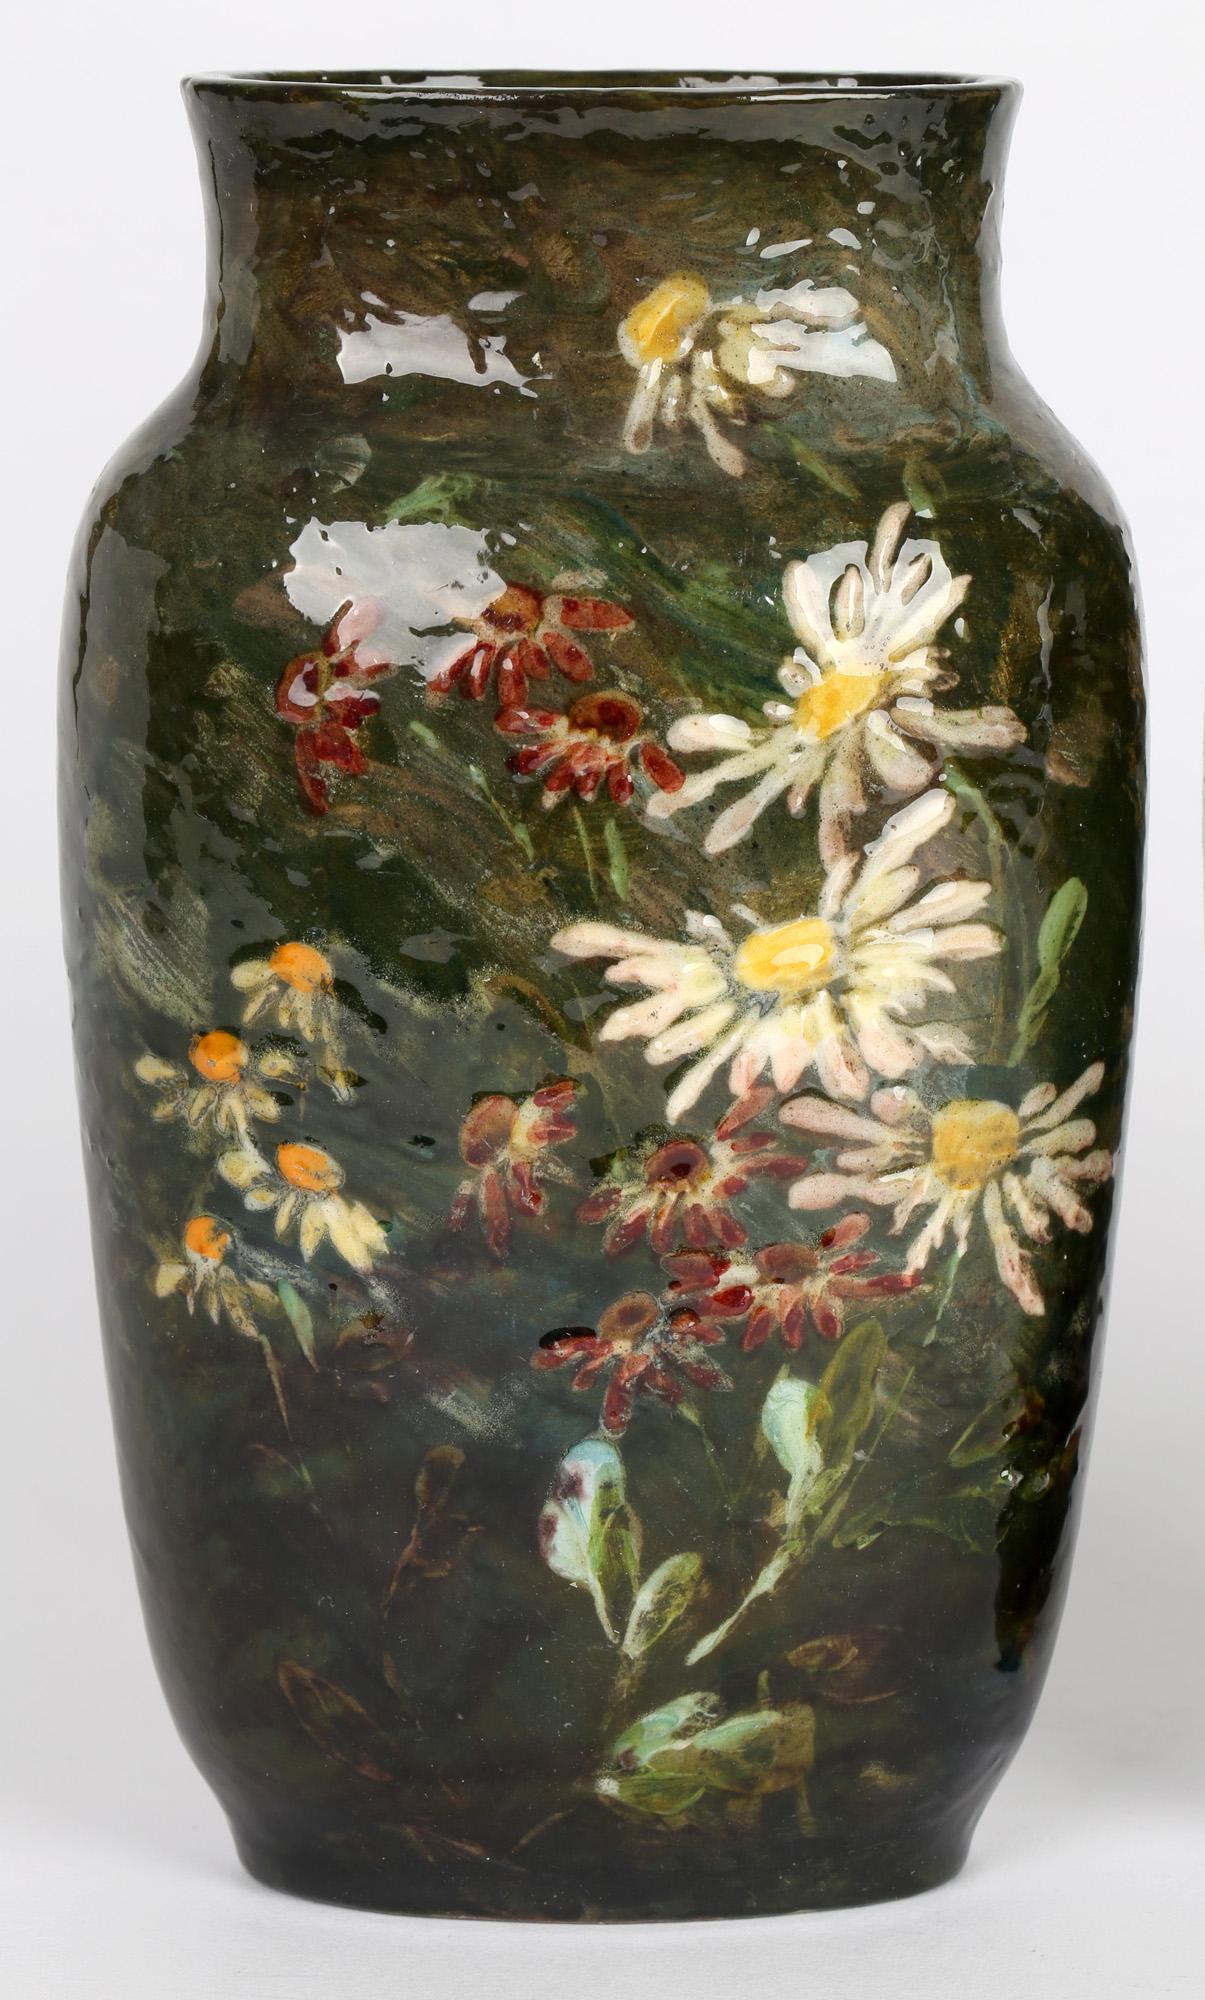 A fine pair French Montigny Sur Loing art pottery vases decorated with floral designs by renowned artist Charles Louis Eugène Virion (French, 1865 - 1946) and dating between 1890 and 1919. The stunning pair of earthenware vases are of flattened oval